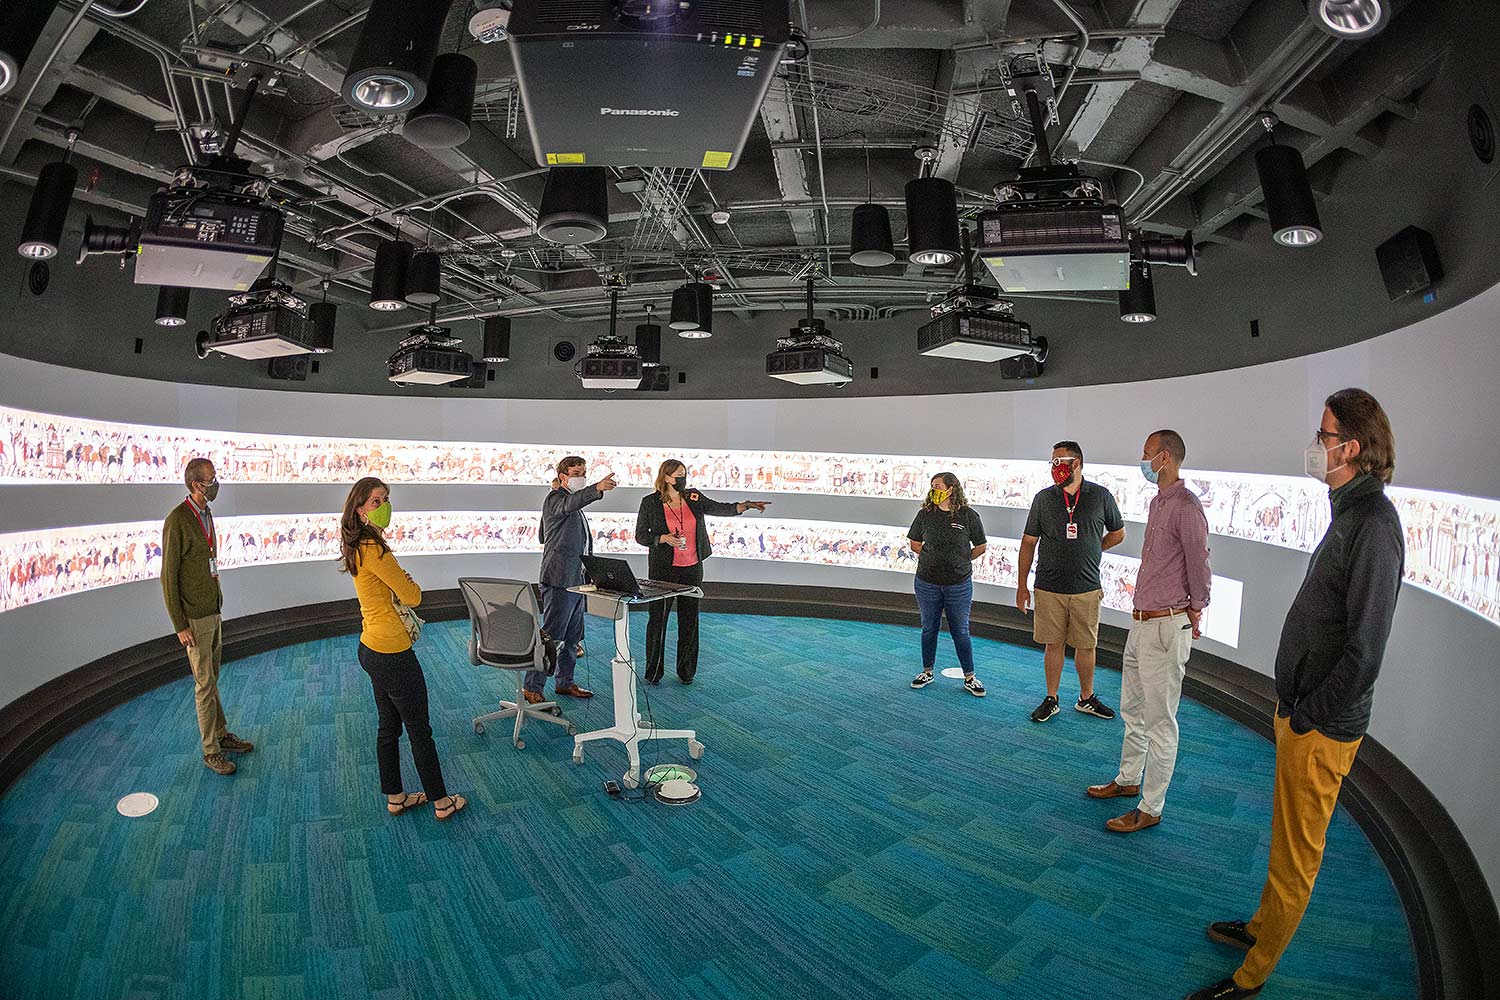 The Visualization Studio interior with 360- degree projection. The exterior of the Visualization Studio is featured in the lead image at the top of this article.